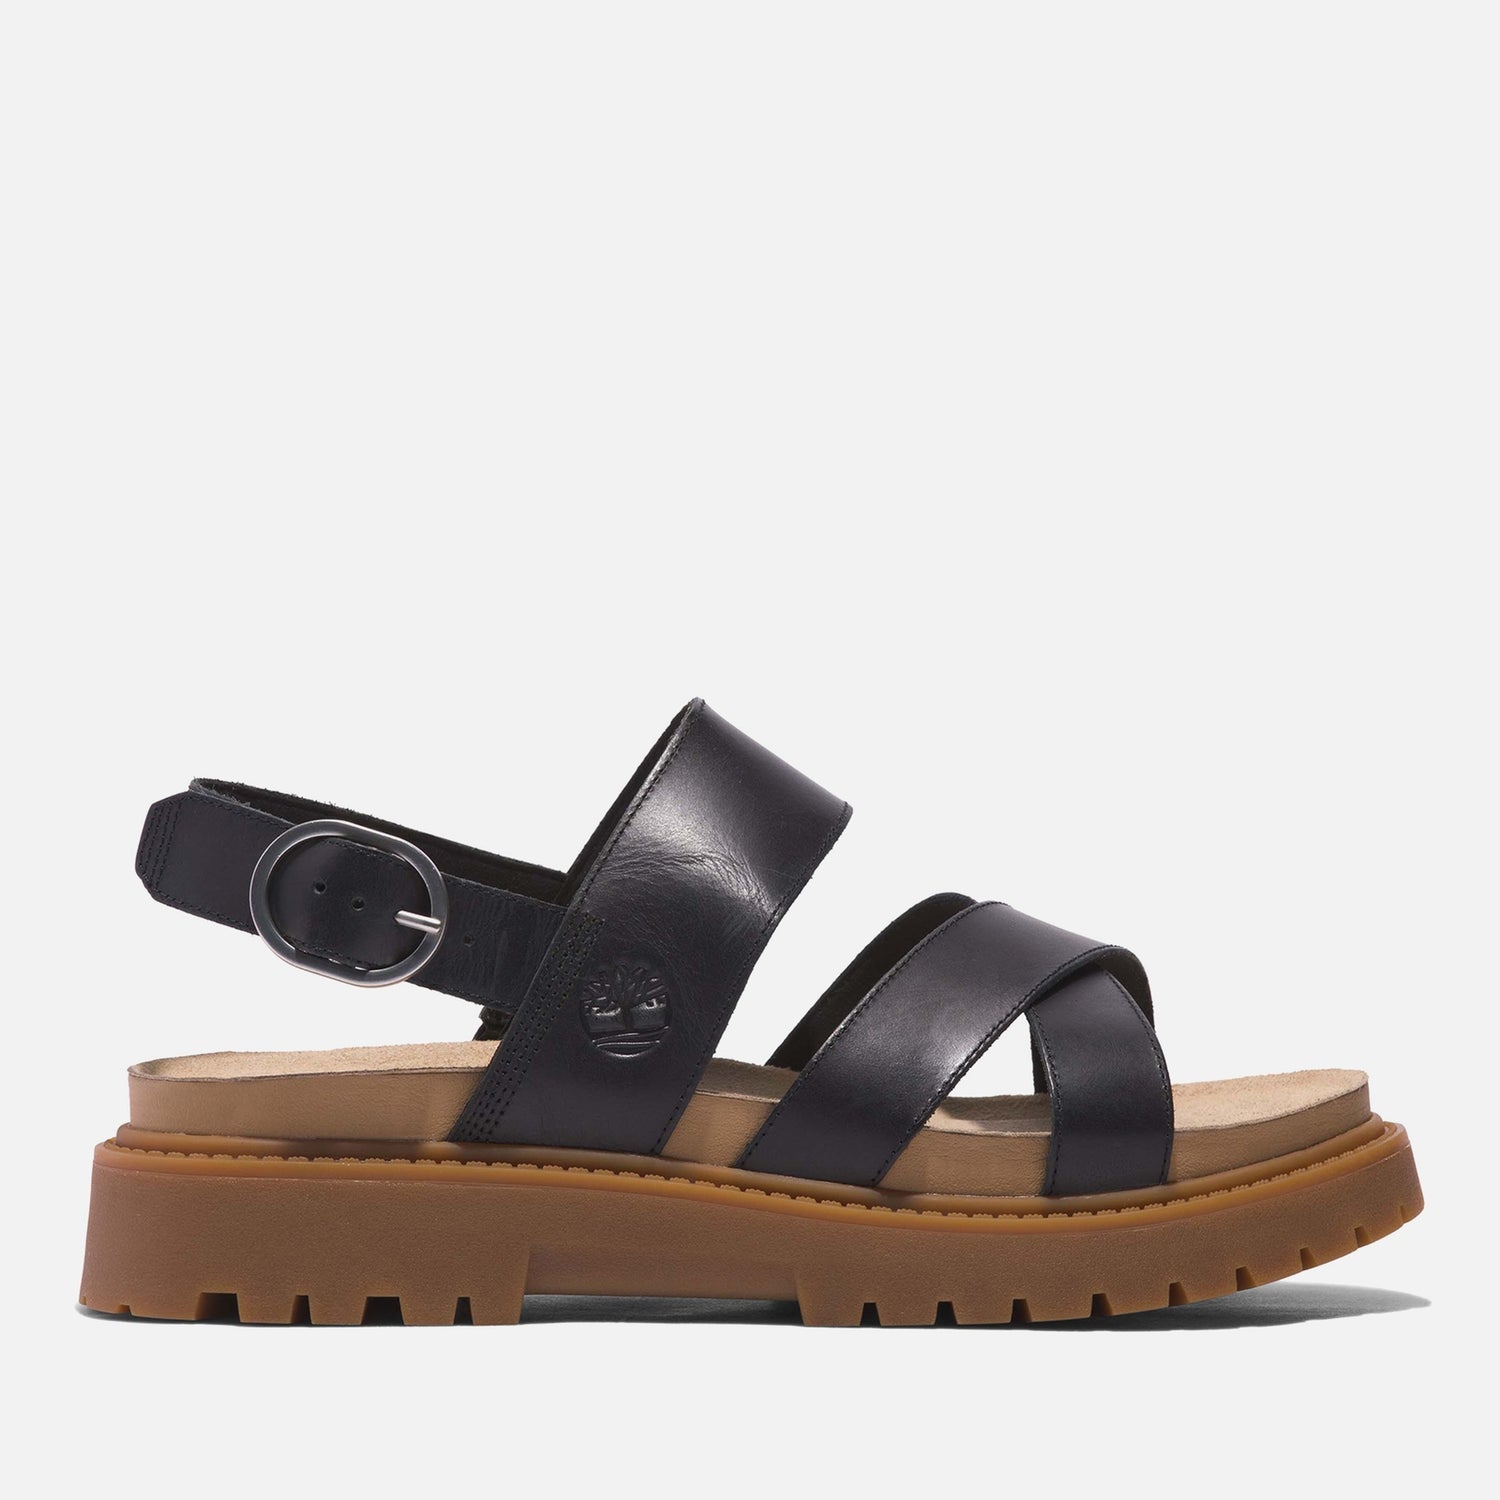 Timberland Women's Clairemont Way Leather Sandals - UK 4